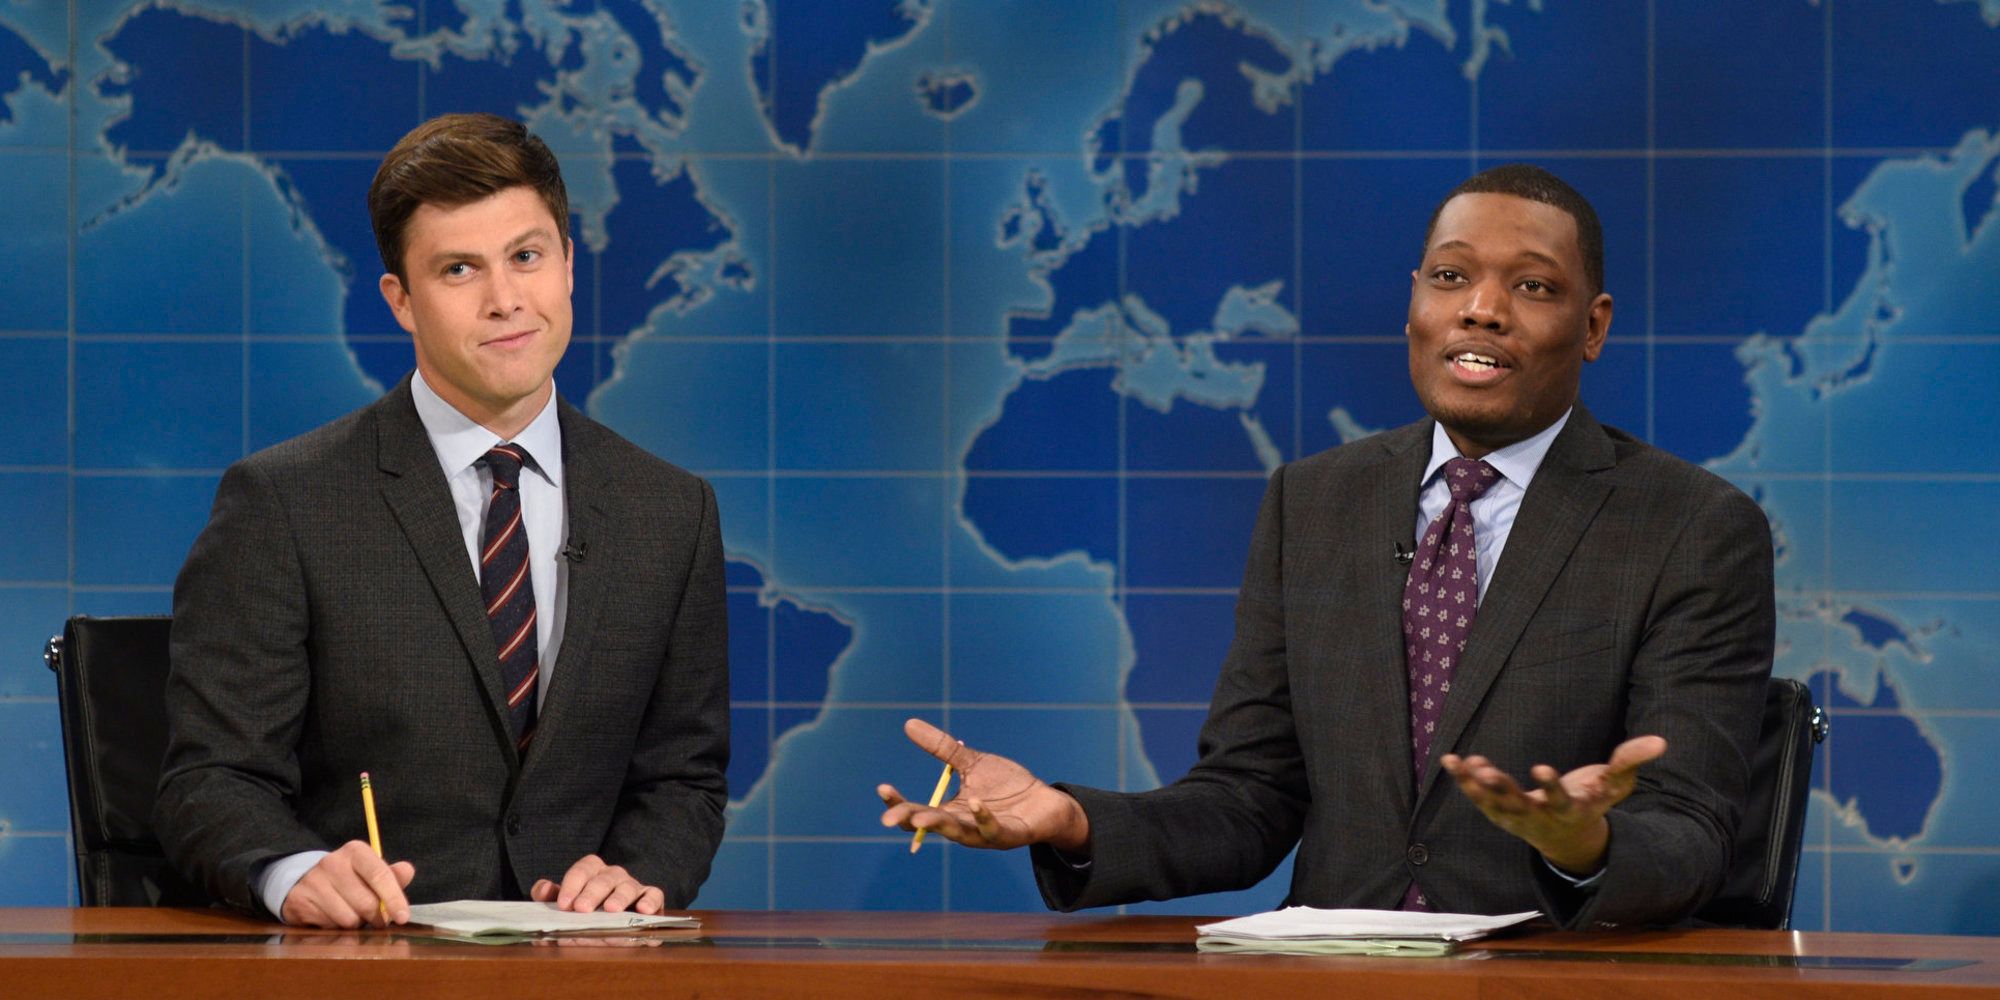 Colin Jost and Michael Che hosting Weekend Update on SNL